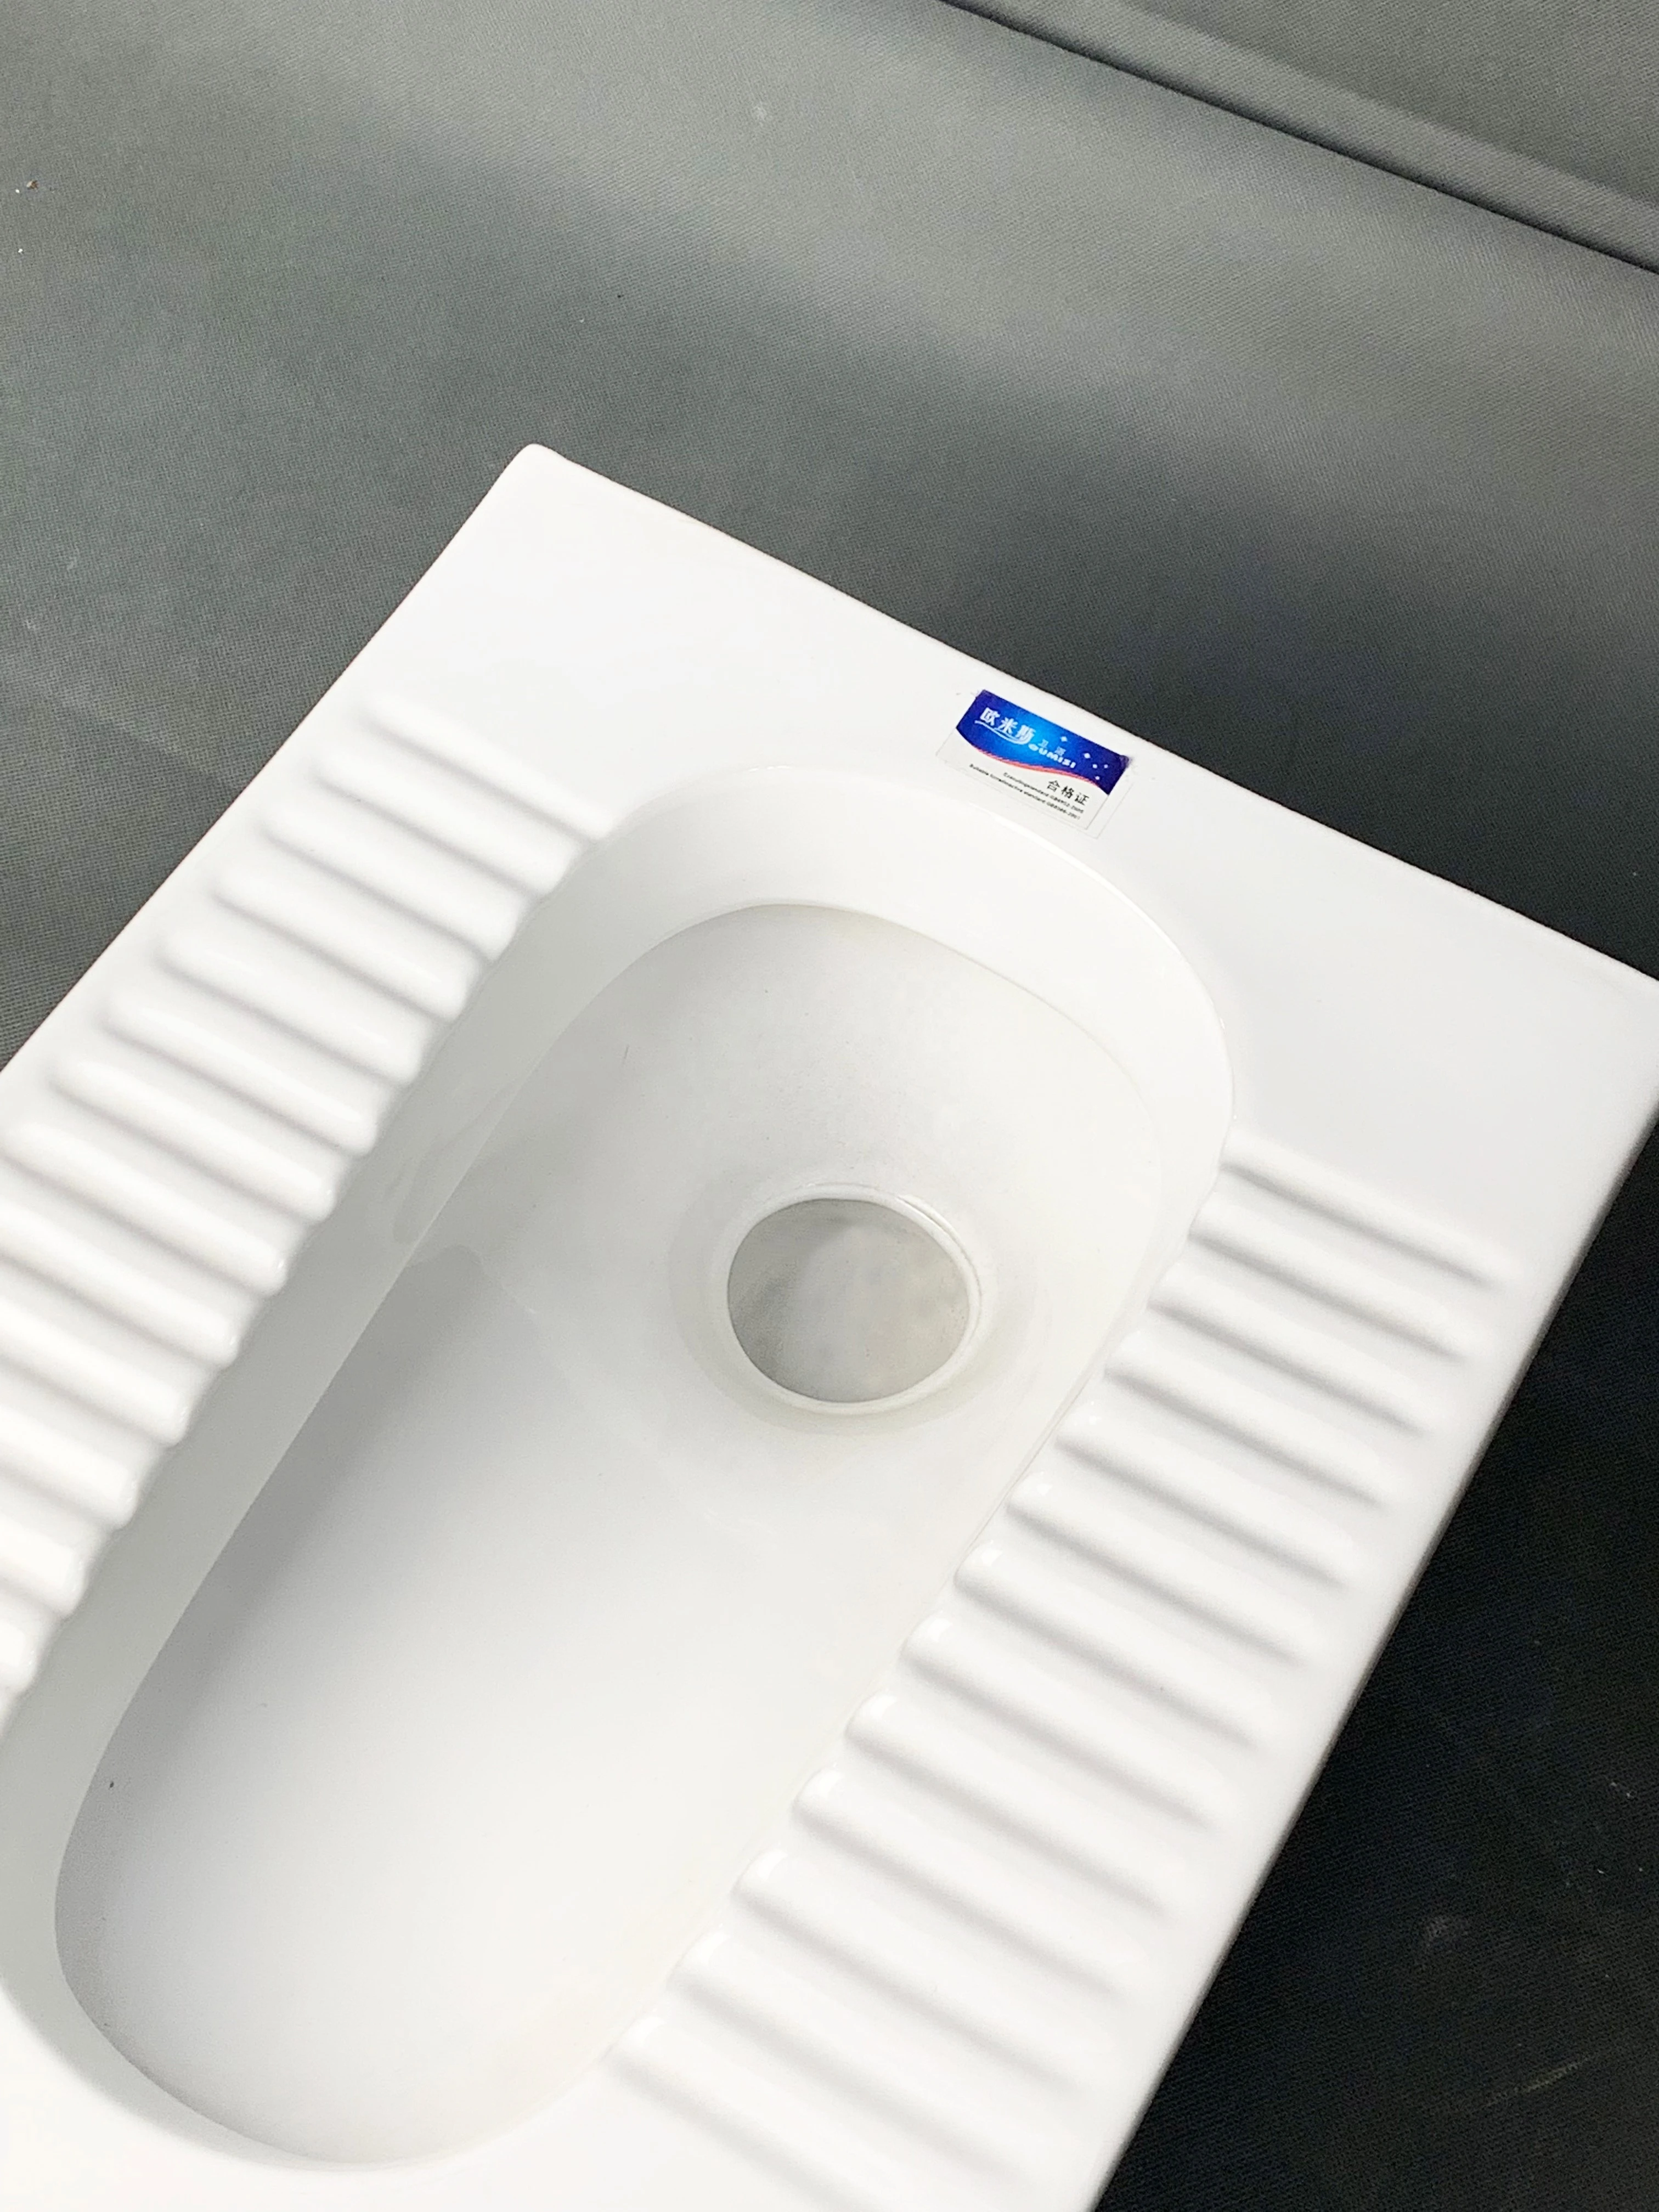 D336 Hot Sale Sanitary Ceramic Arabic wc Squat pan Toilet with Trapway